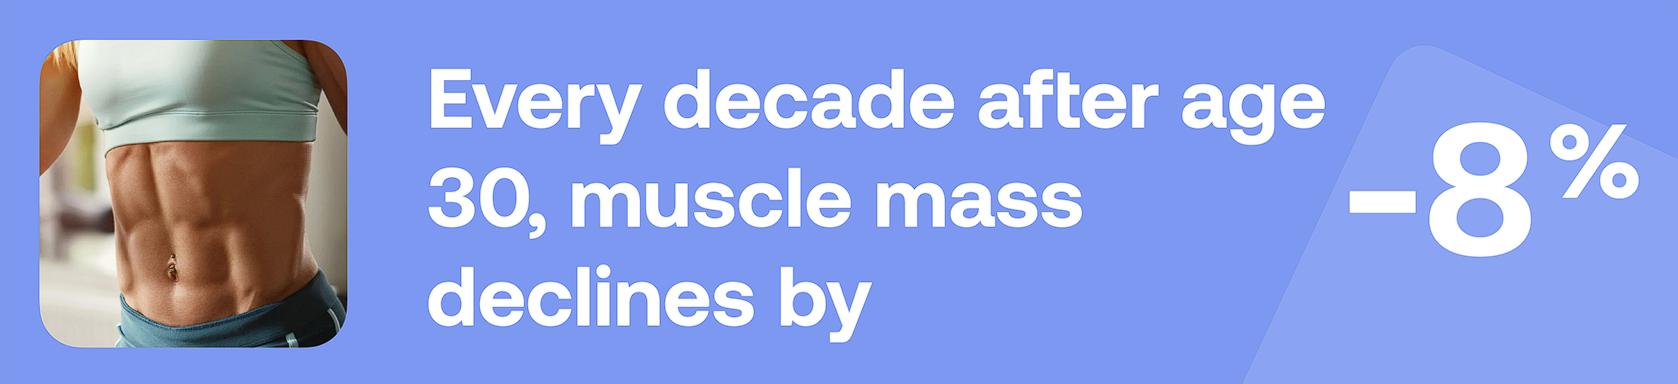 Every decade after age 30, muscle mass declines by -8%